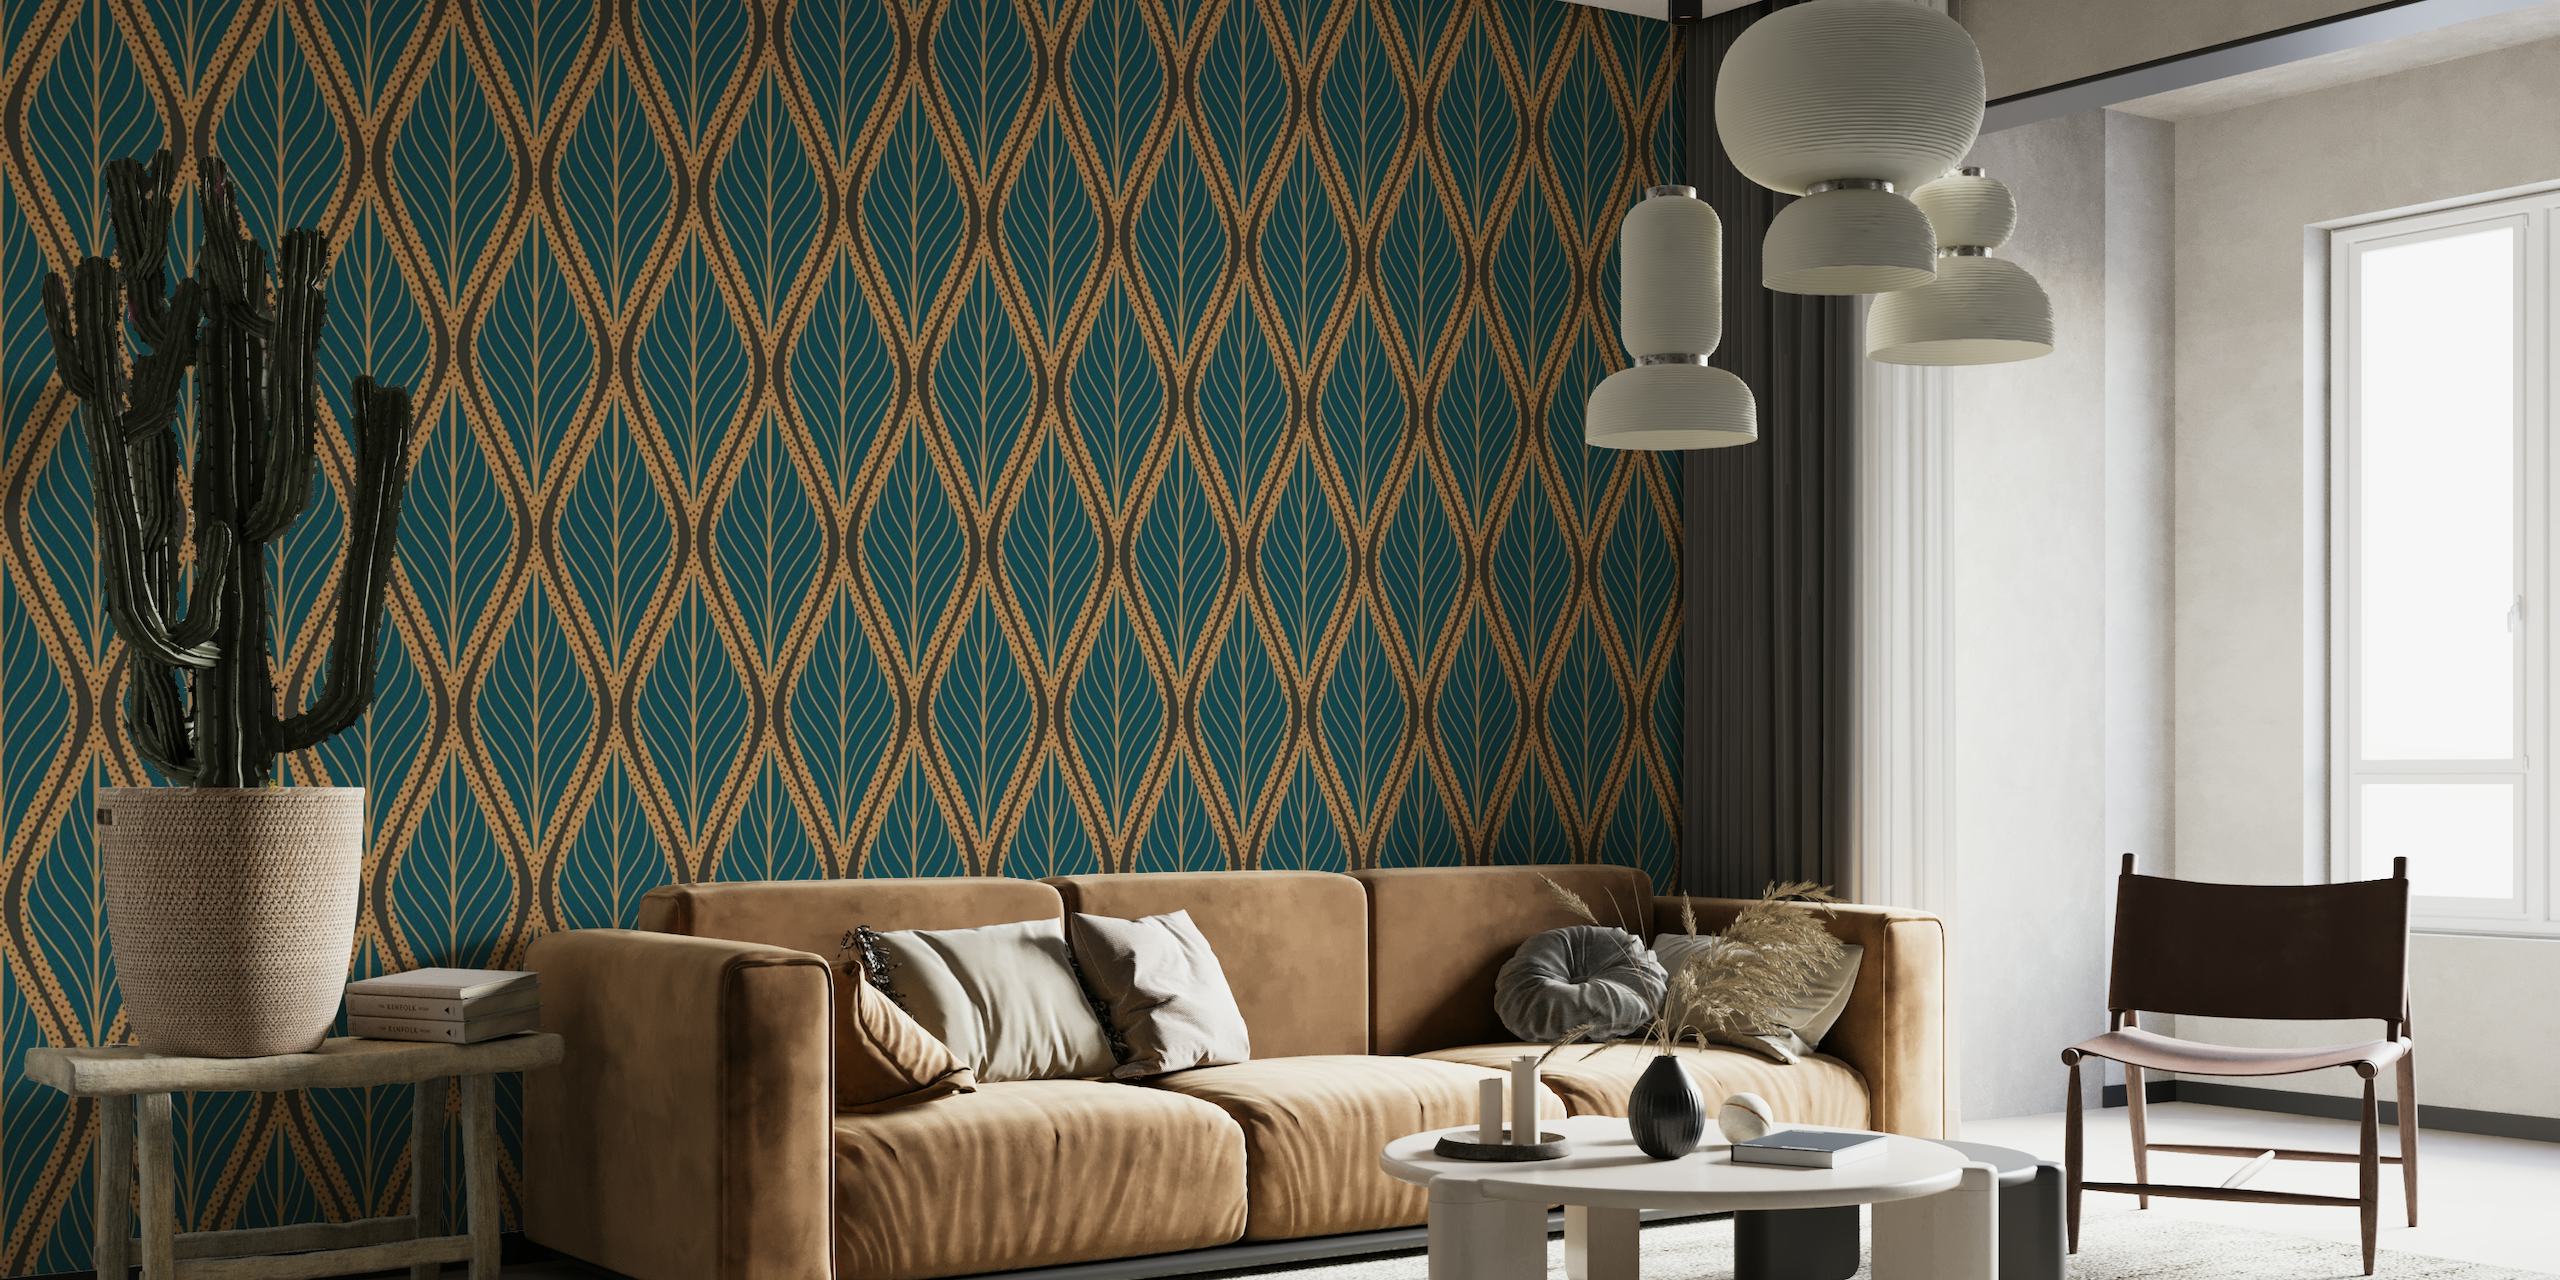 Abstract Art Deco Leaves Teal patterned wall mural